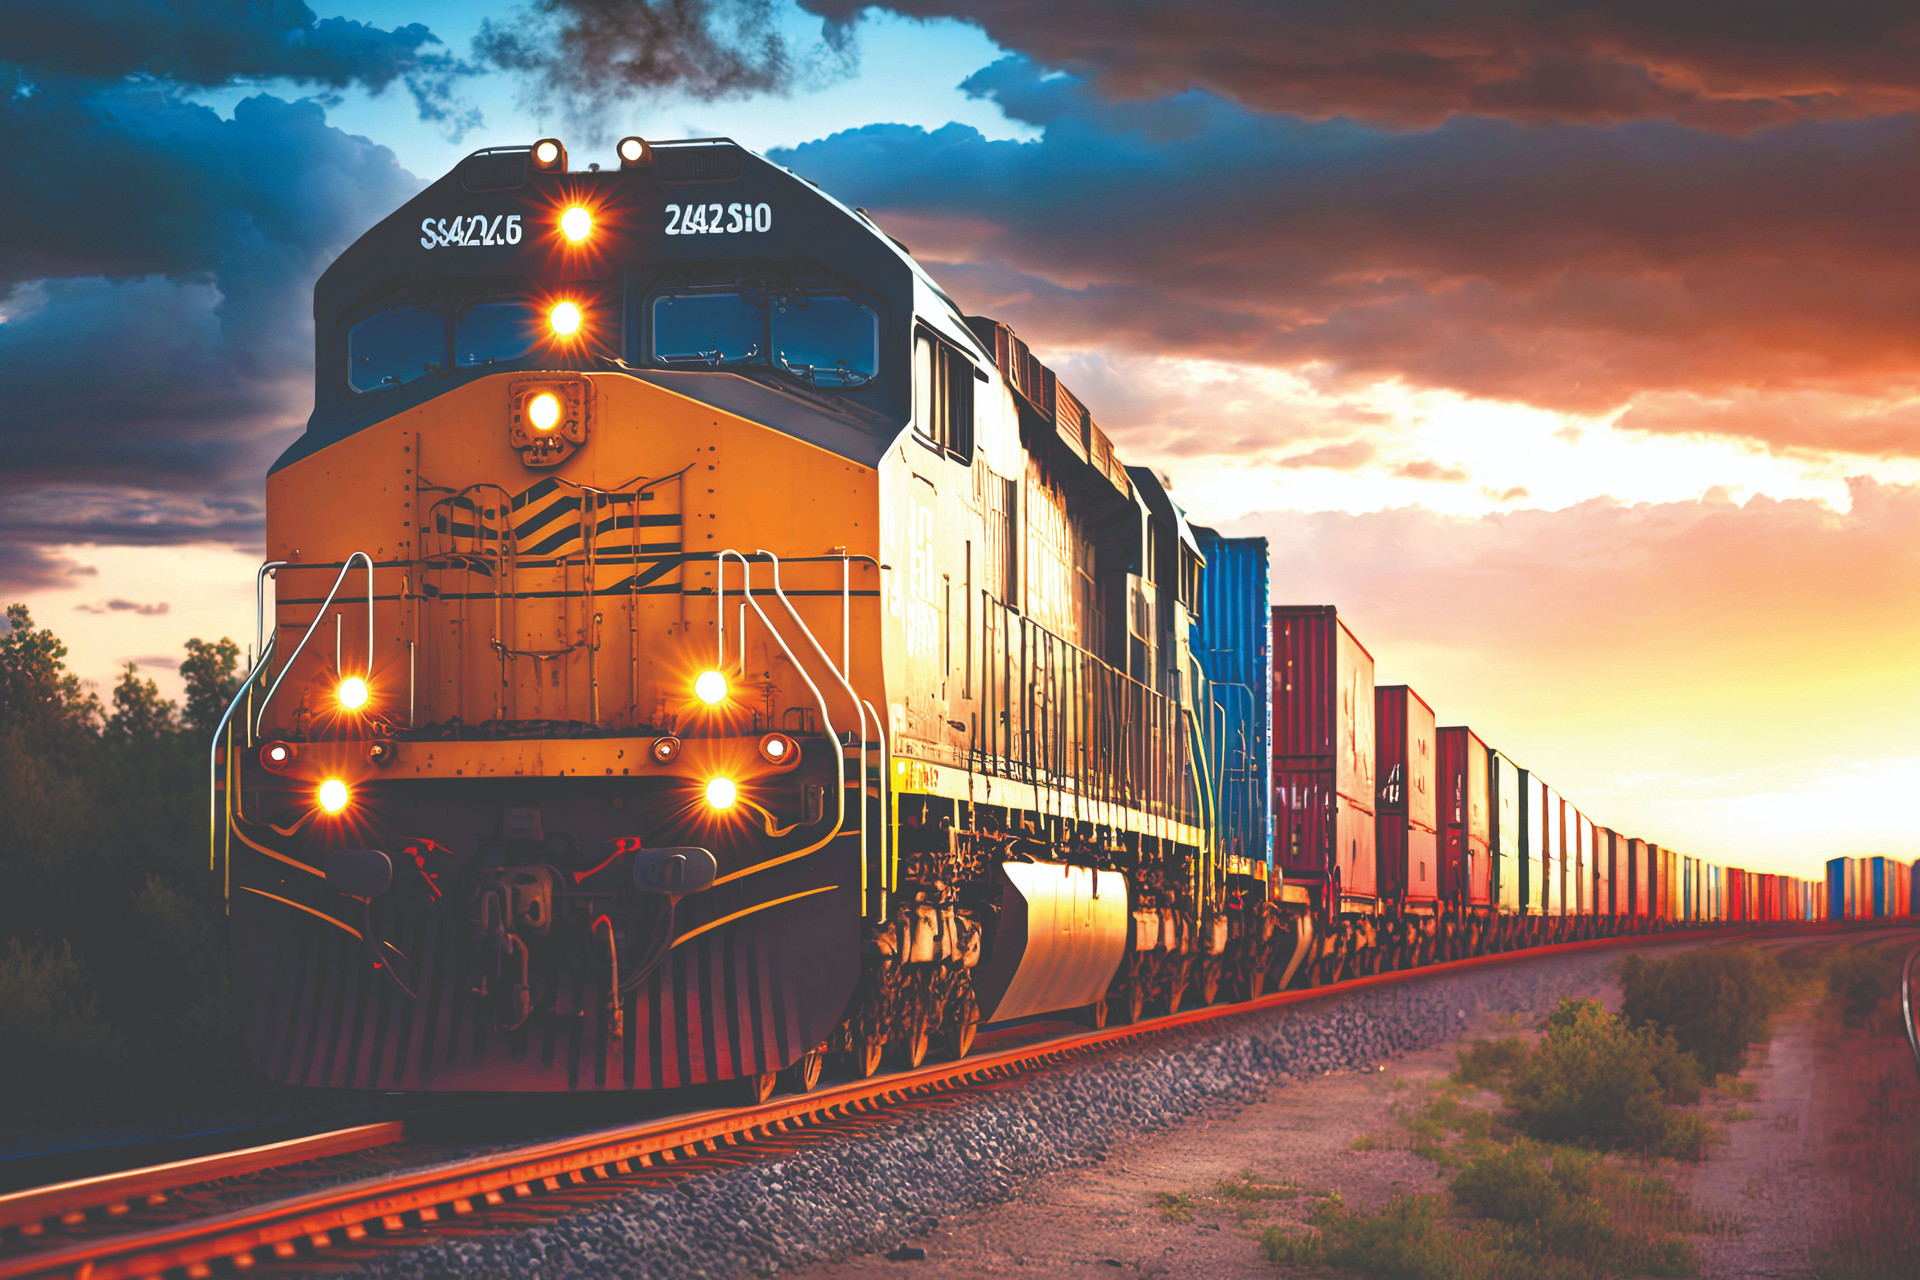 cargo-train-with-loaded-wagons-containers-goes-evening-compressed.jpeg